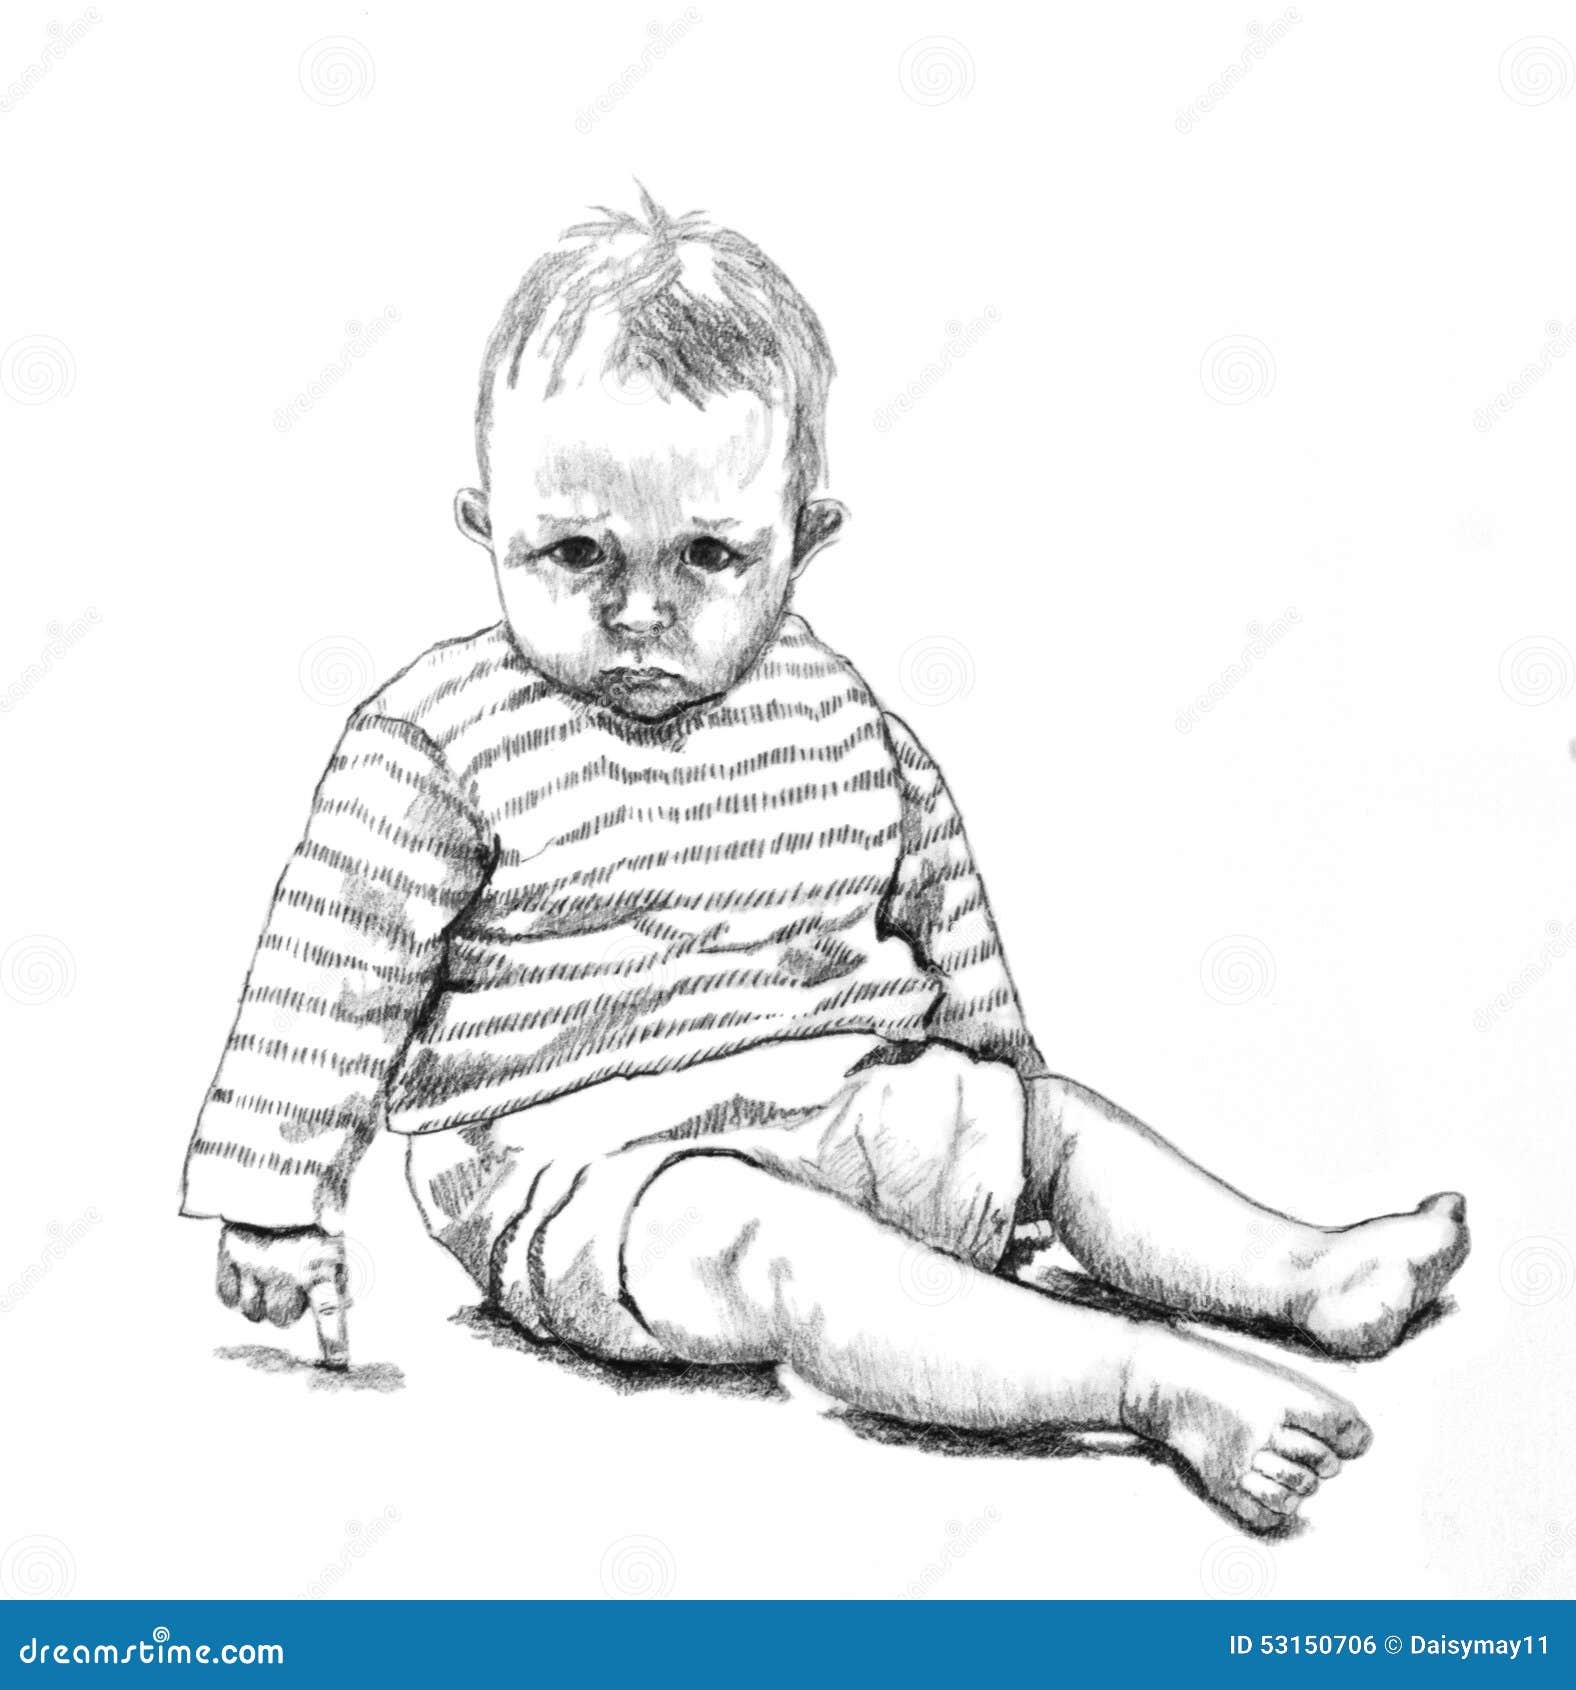 Art by Shraddha  Pencil sketch of Cute Baby Size A4  Facebook